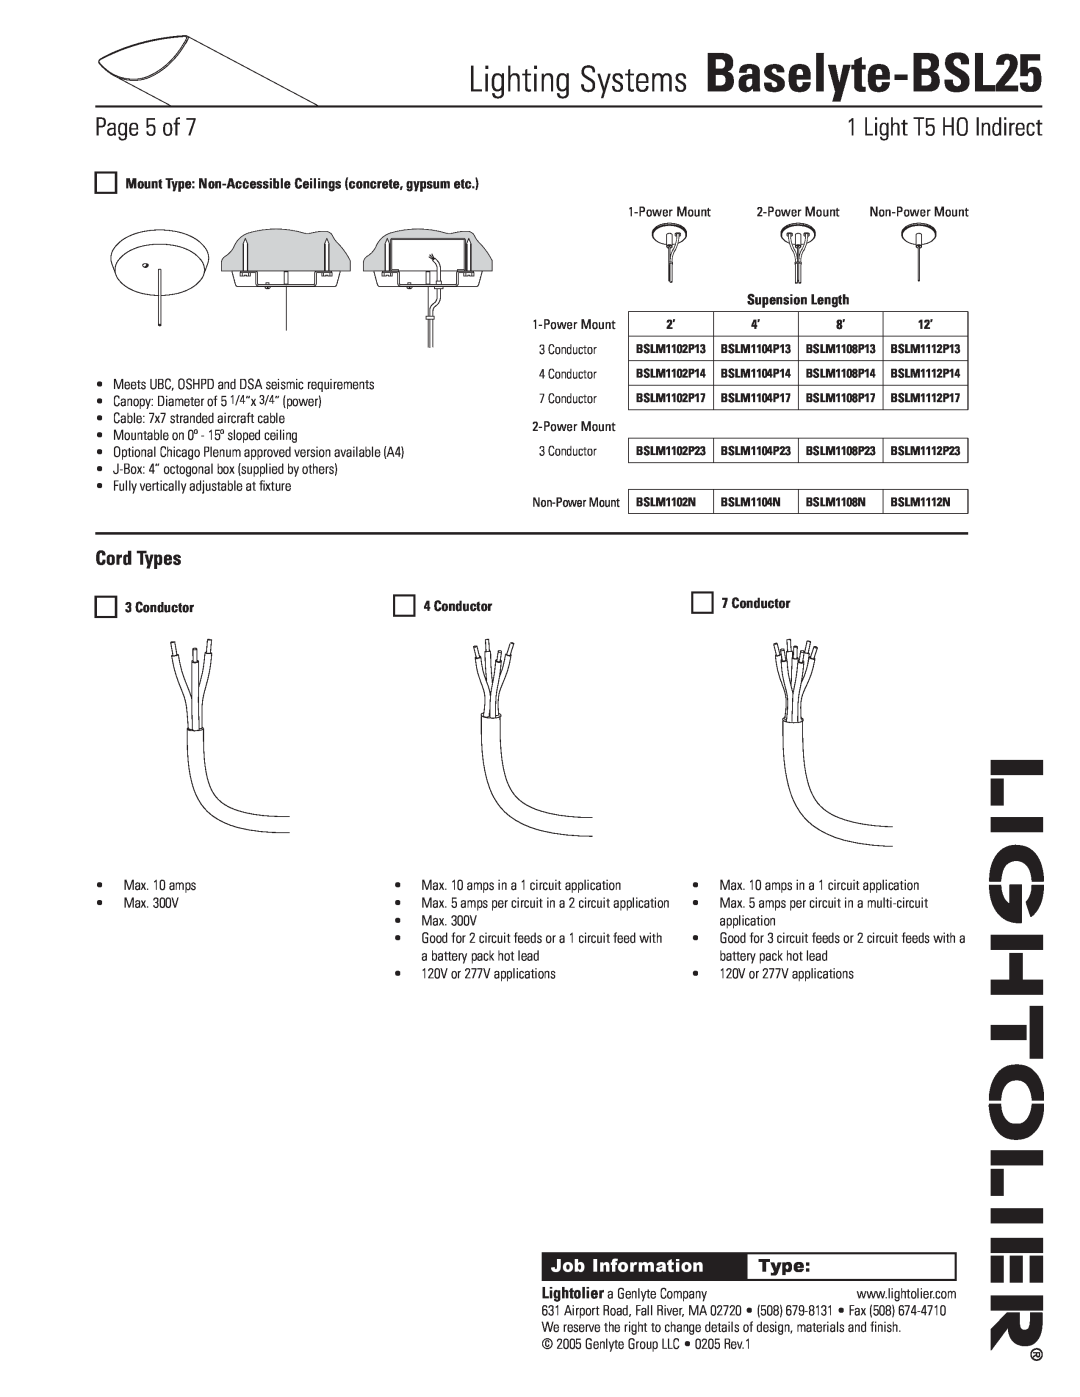 Lightolier Cord Types, Conductor, Lighting Systems Baselyte-BSL25, Page of,  Light T5 HO Indirect, Job Information 